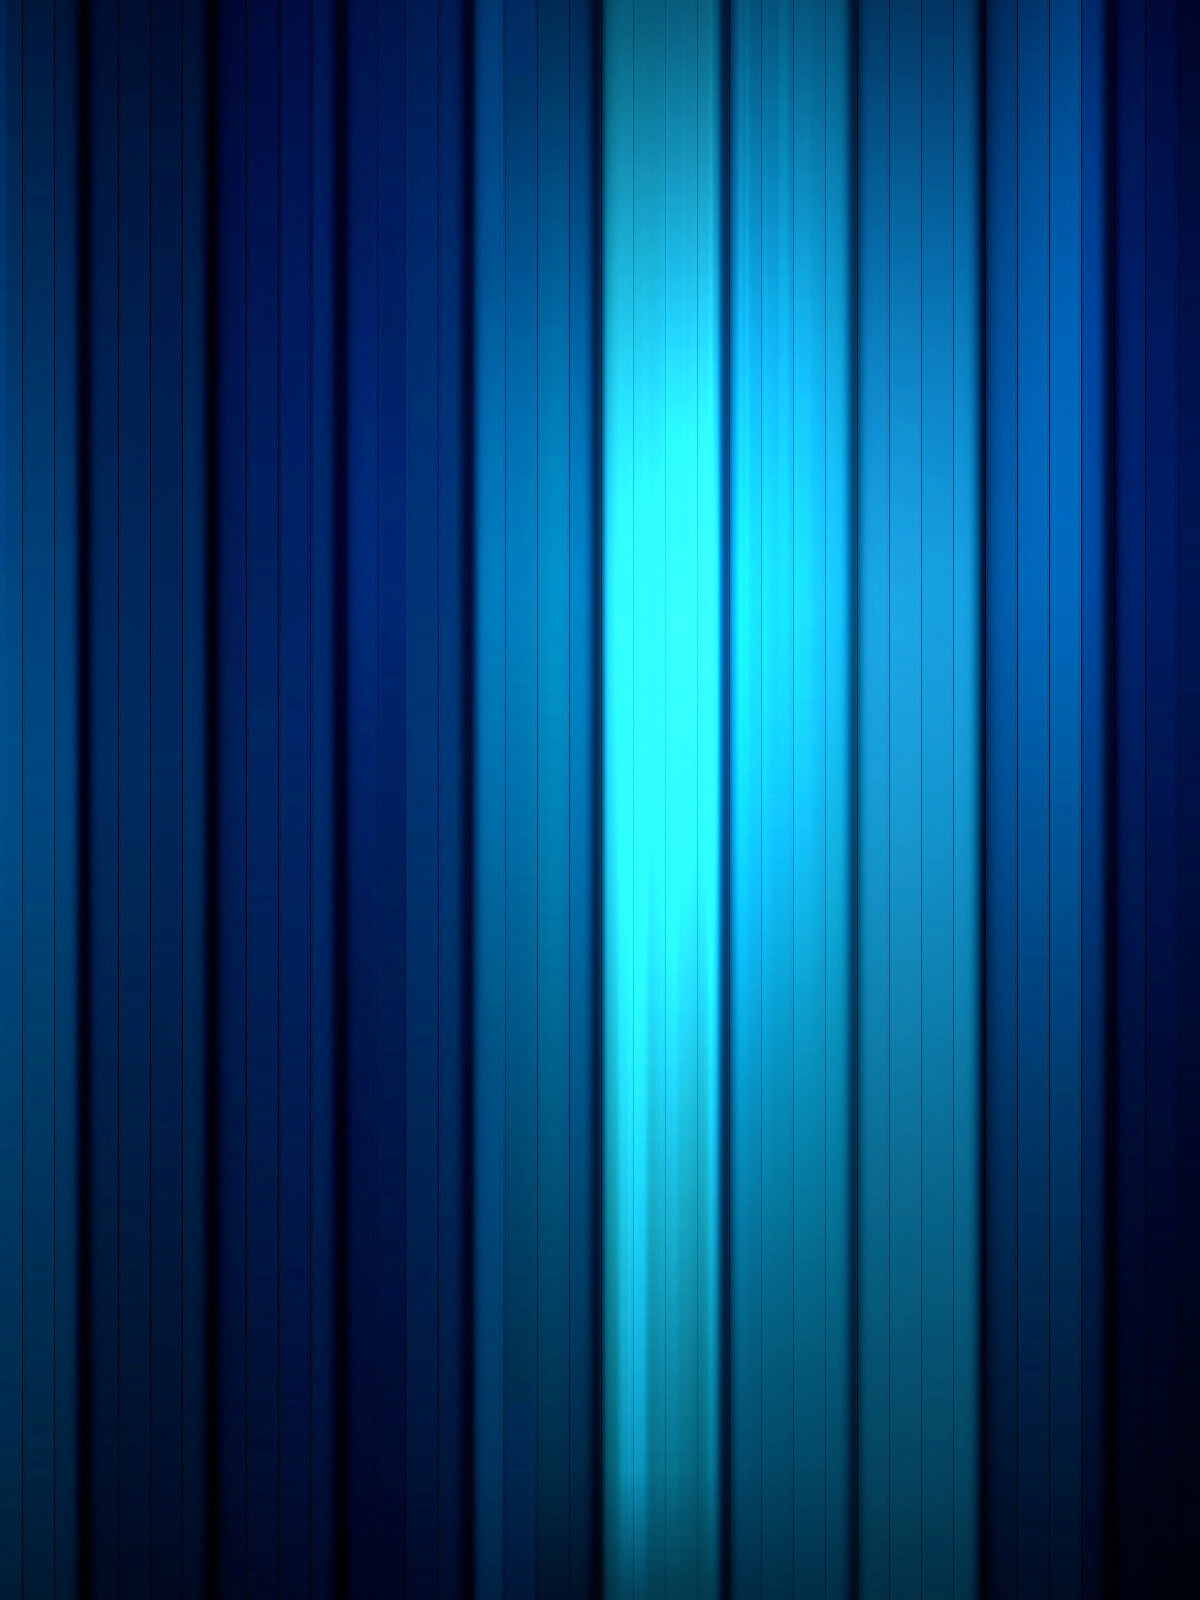 Blue Stripes Texture Android Wallpaper